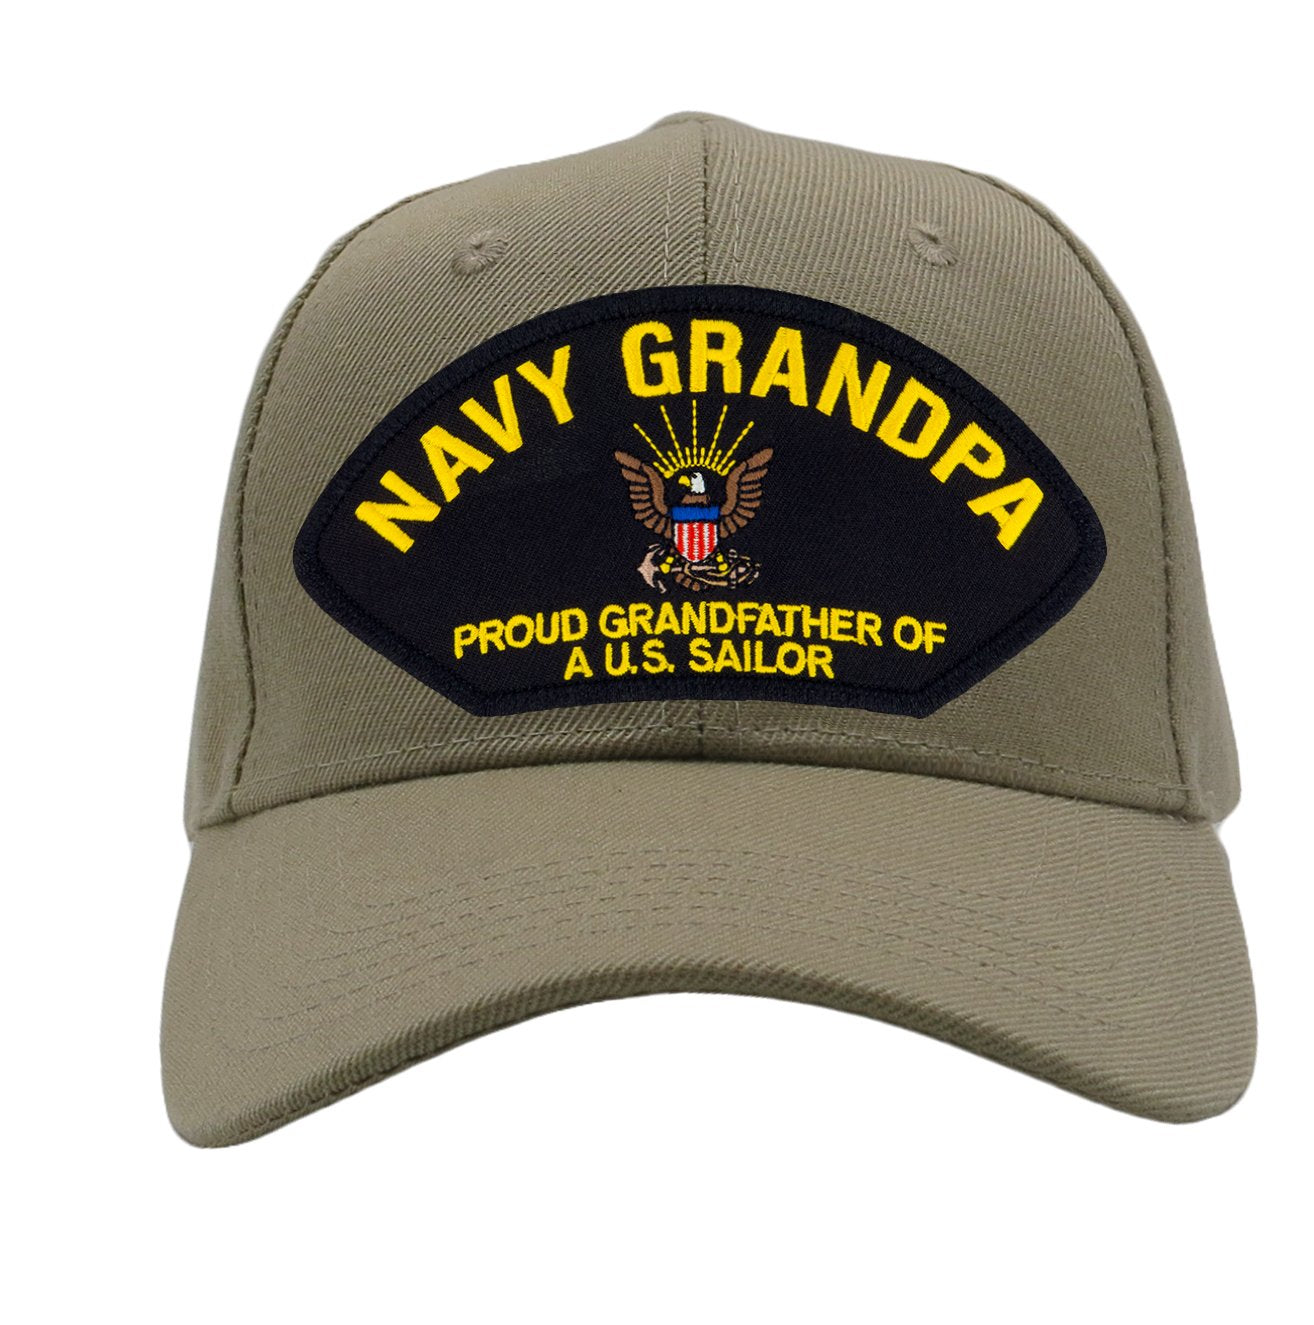 US Navy Grandpa - Proud Grandfather of a US Sailor Hat - Multiple Colors Available